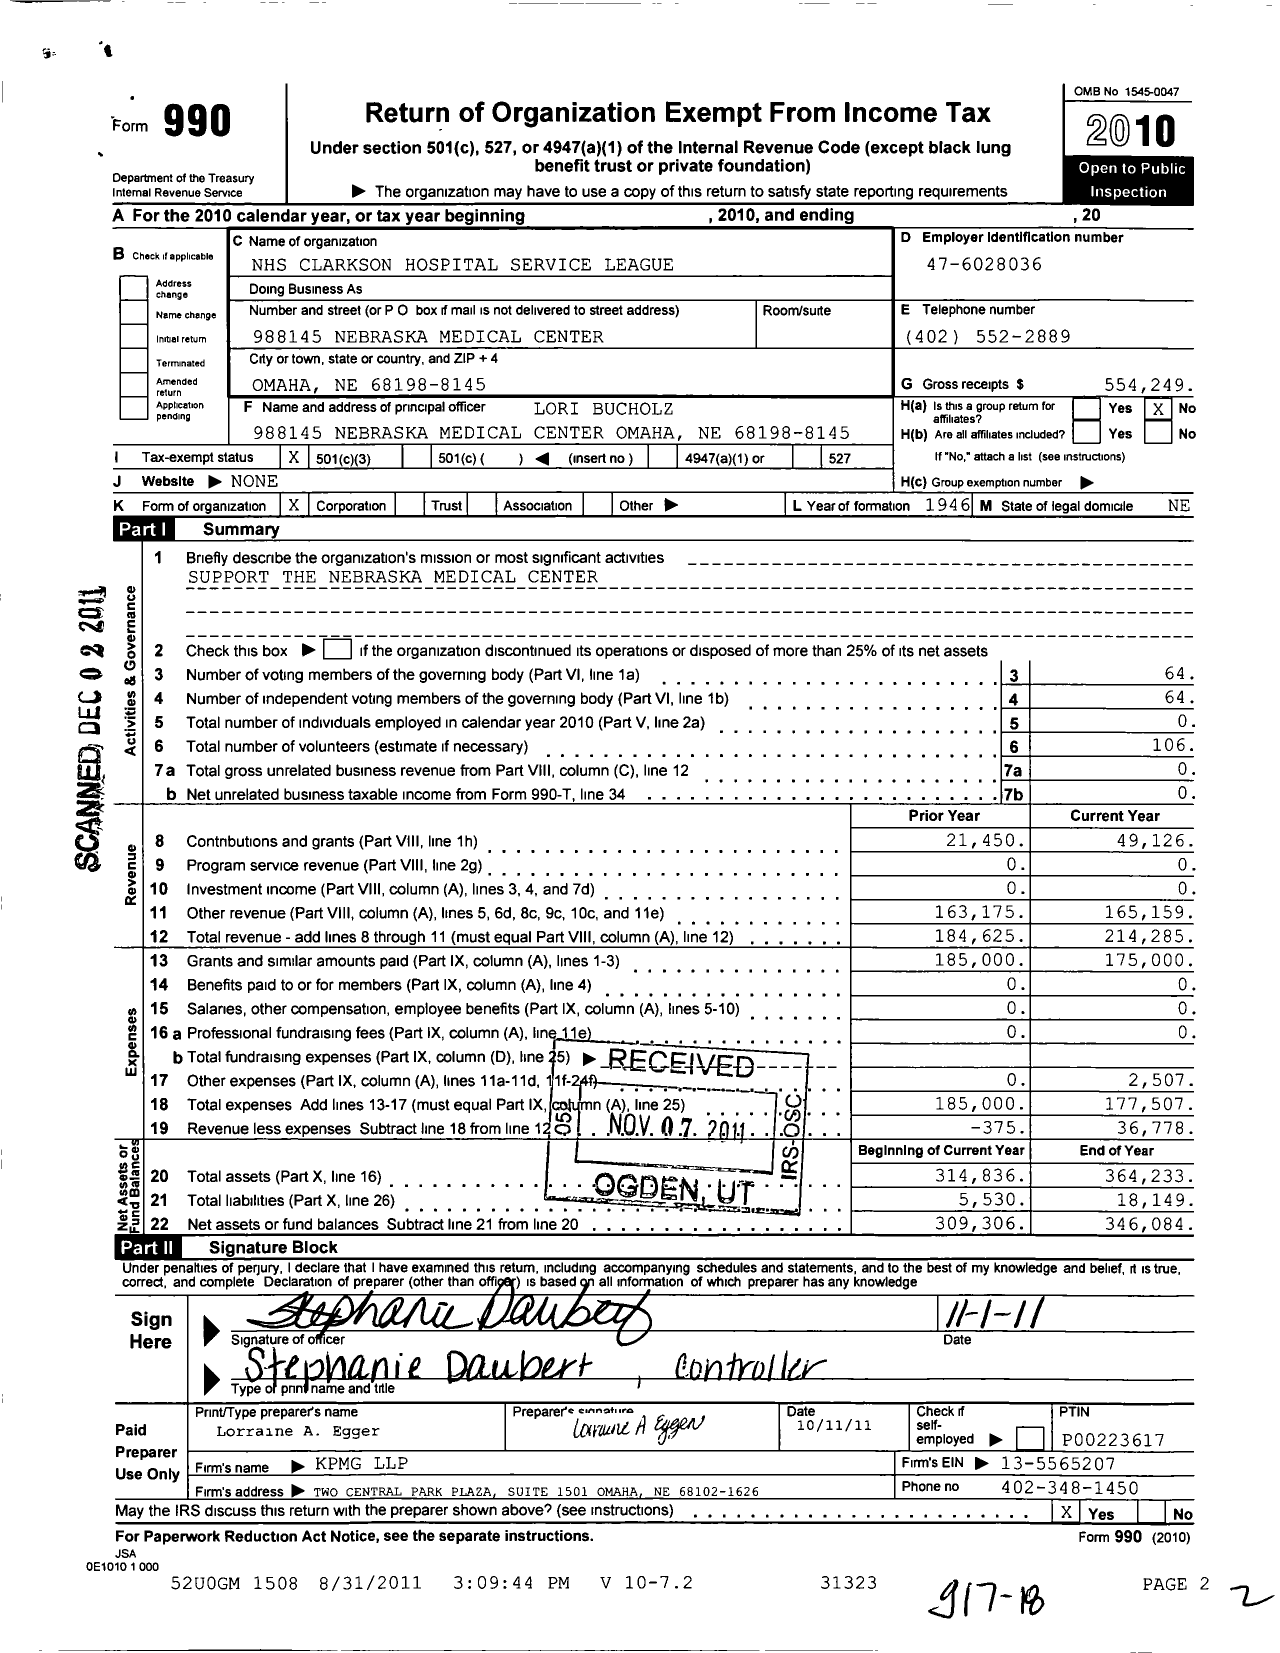 Image of first page of 2010 Form 990 for NHS Clarkson Hospital Services League